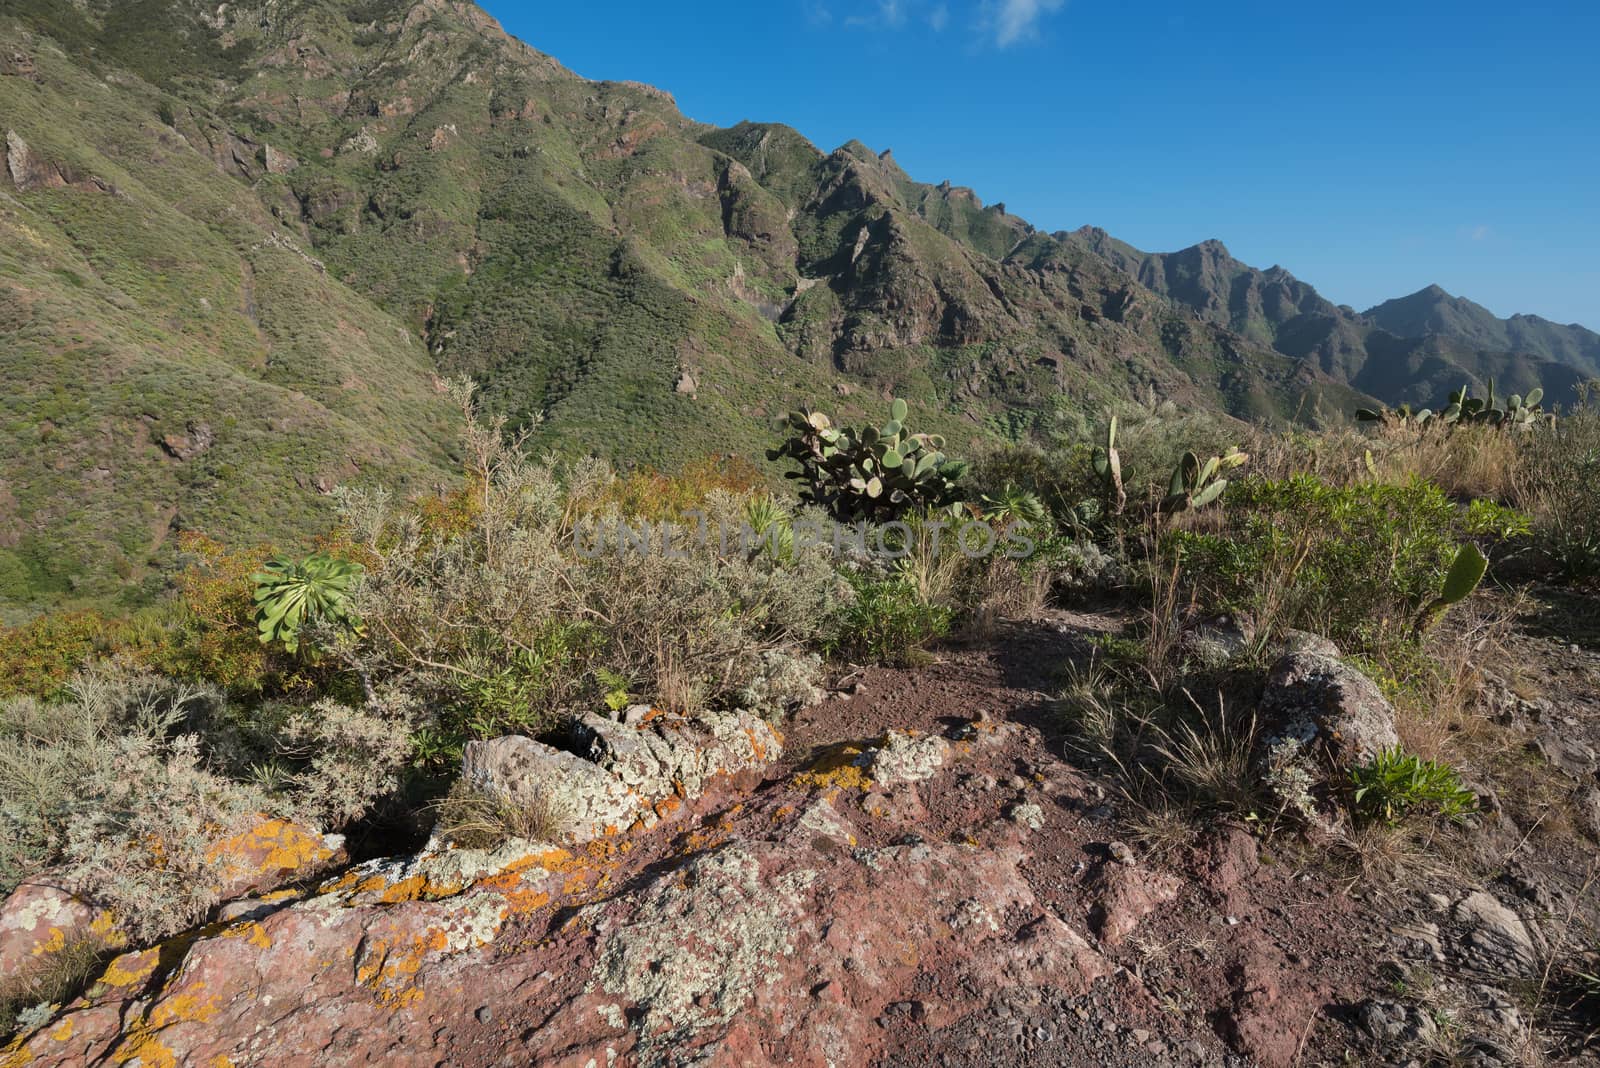 Volcanic landscape in Anaga mountains, Tenerife, Canary islands, Spain.